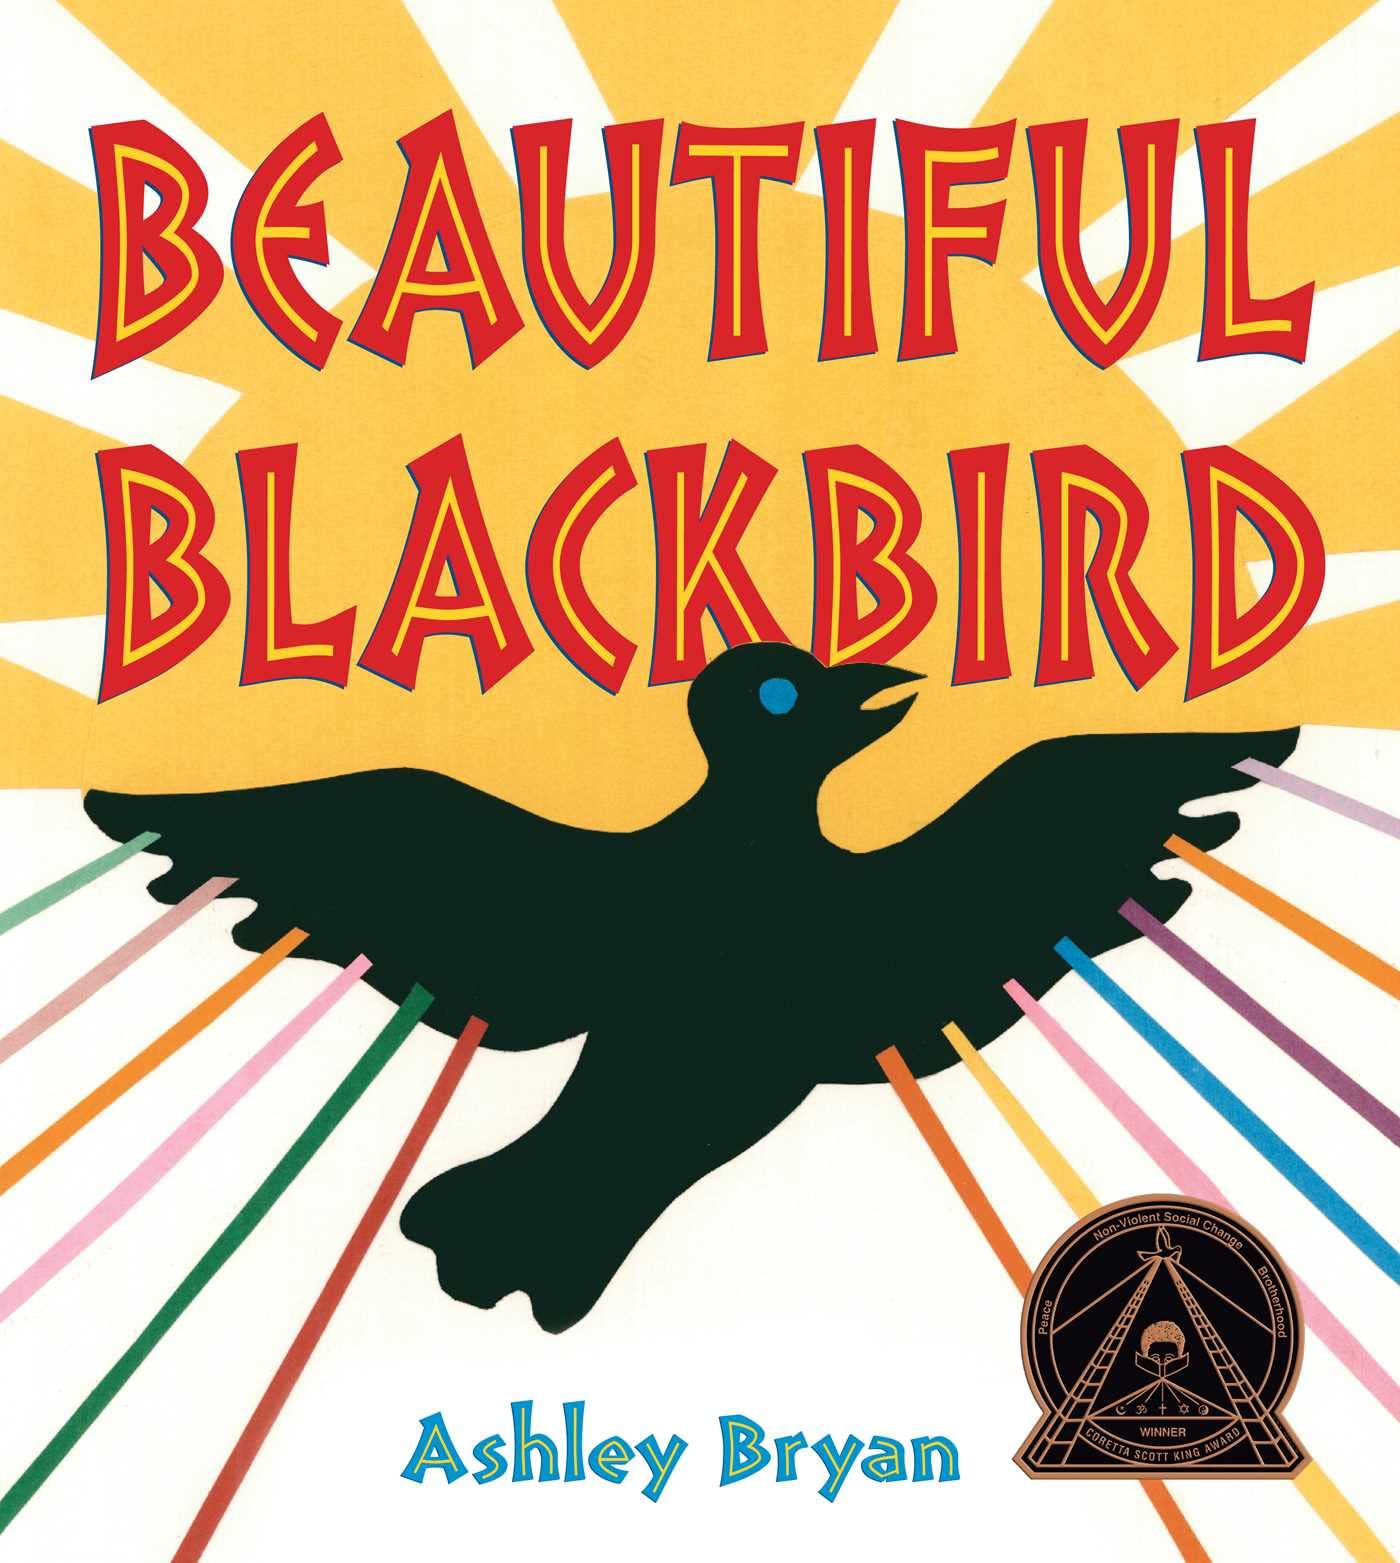 Cover of Beautiful Blackbird, featuring a two-dimensional image of a black bird with a blue eye flying across a yellow sun. From the black bird's wings, colorful stripes emanate, suggesting a shimmering effect from the sunlight.